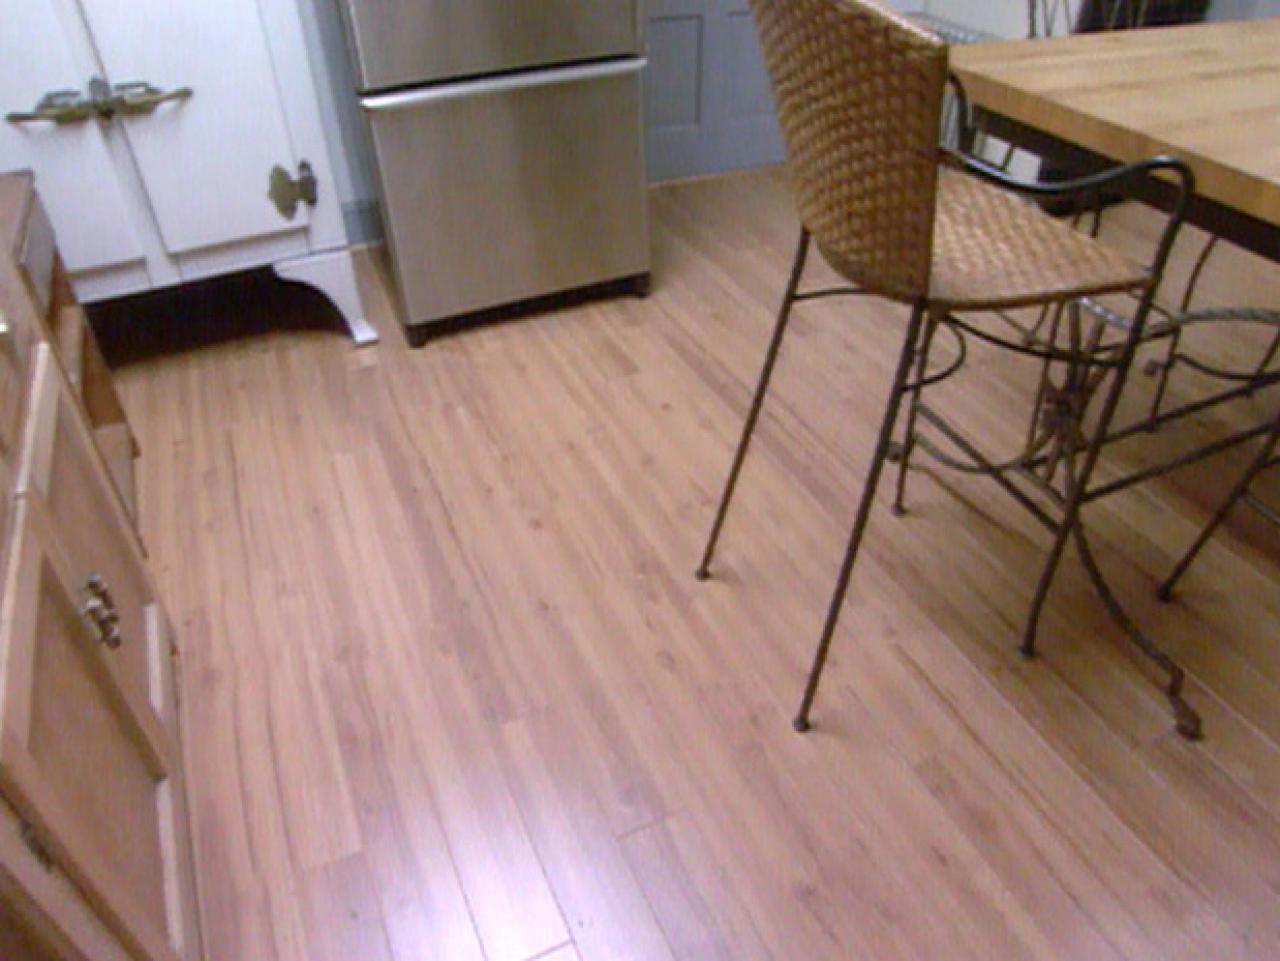 How To Install Laminate Flooring, How To Lay Down Kitchen Flooring